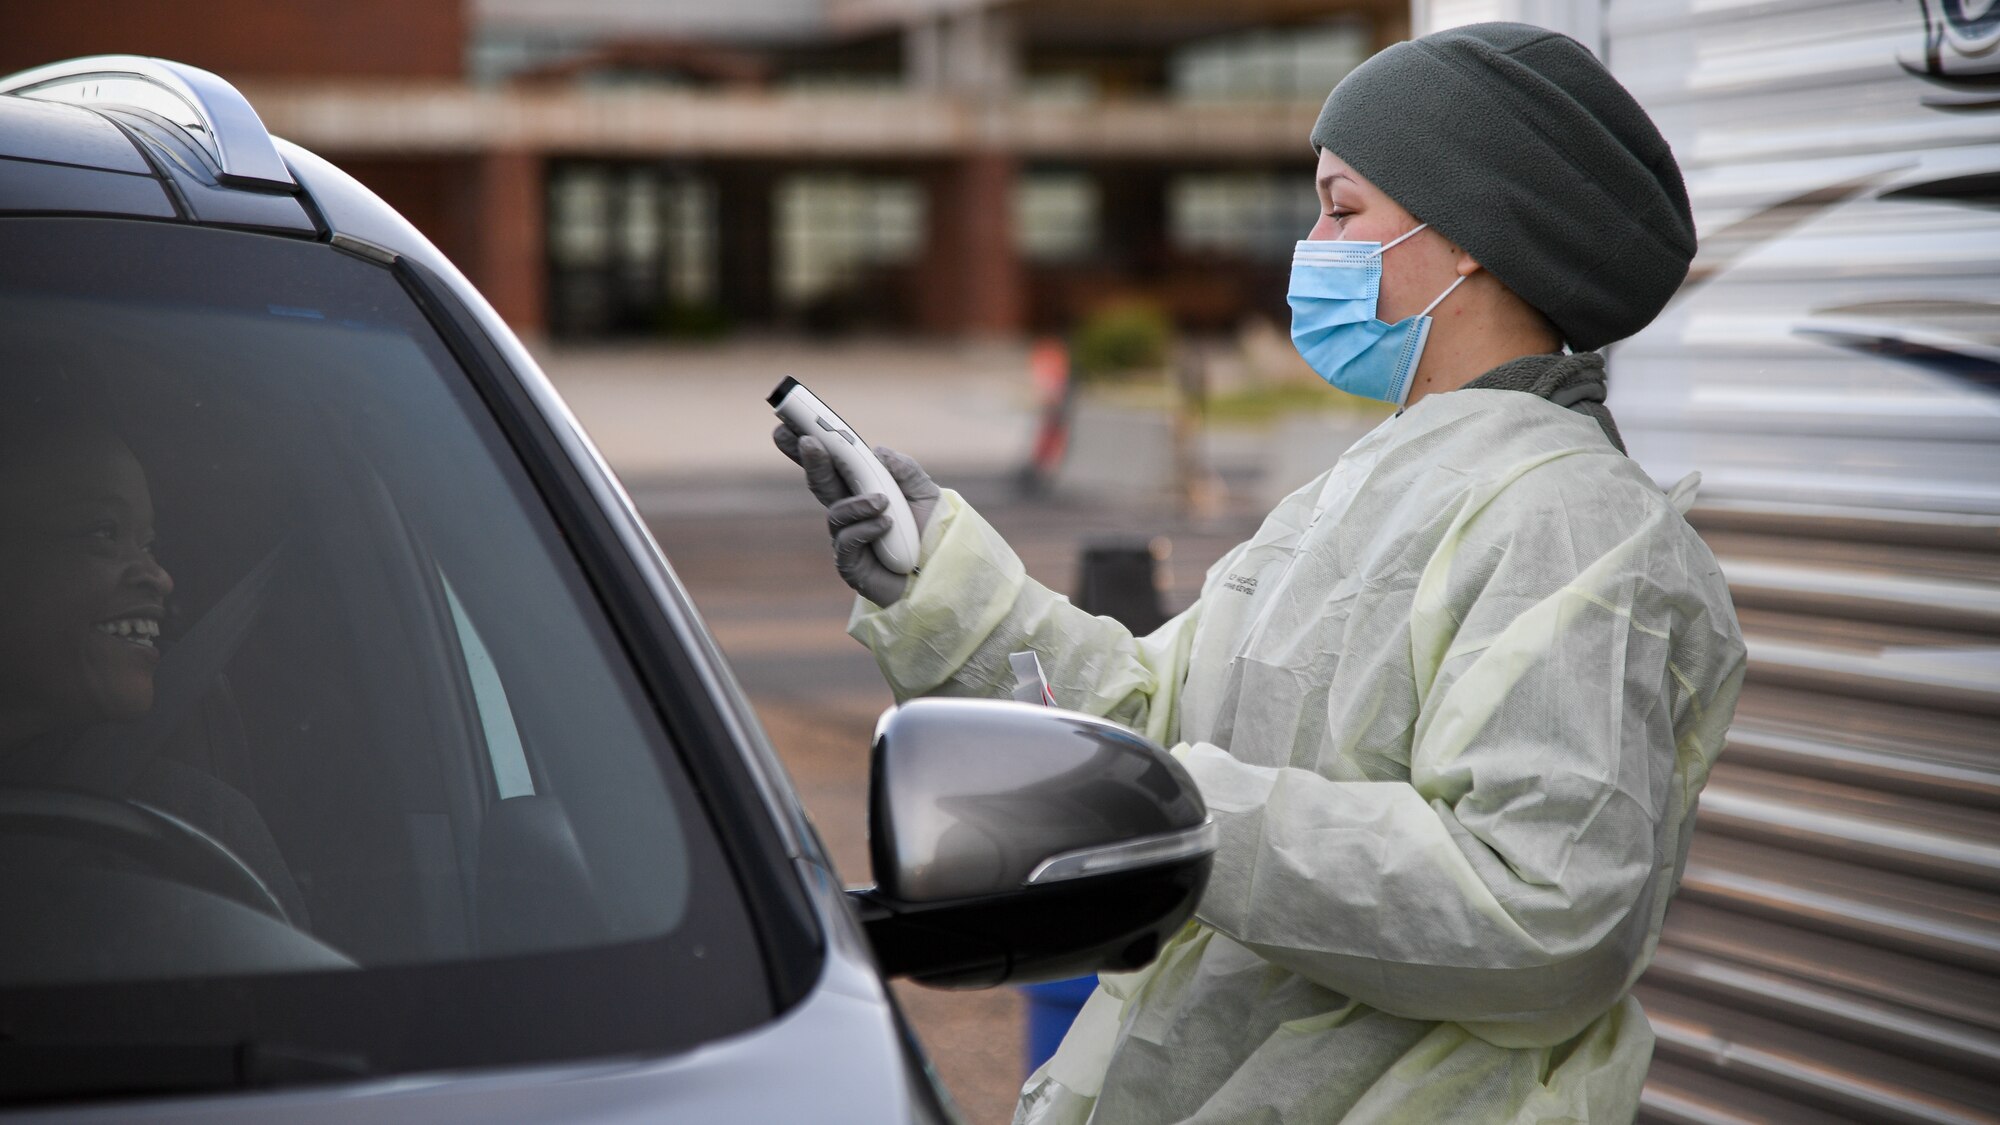 Airman Tori Salem, 75th Medical Group, holds a thermometer during a drive-thru COVID-19 screening.